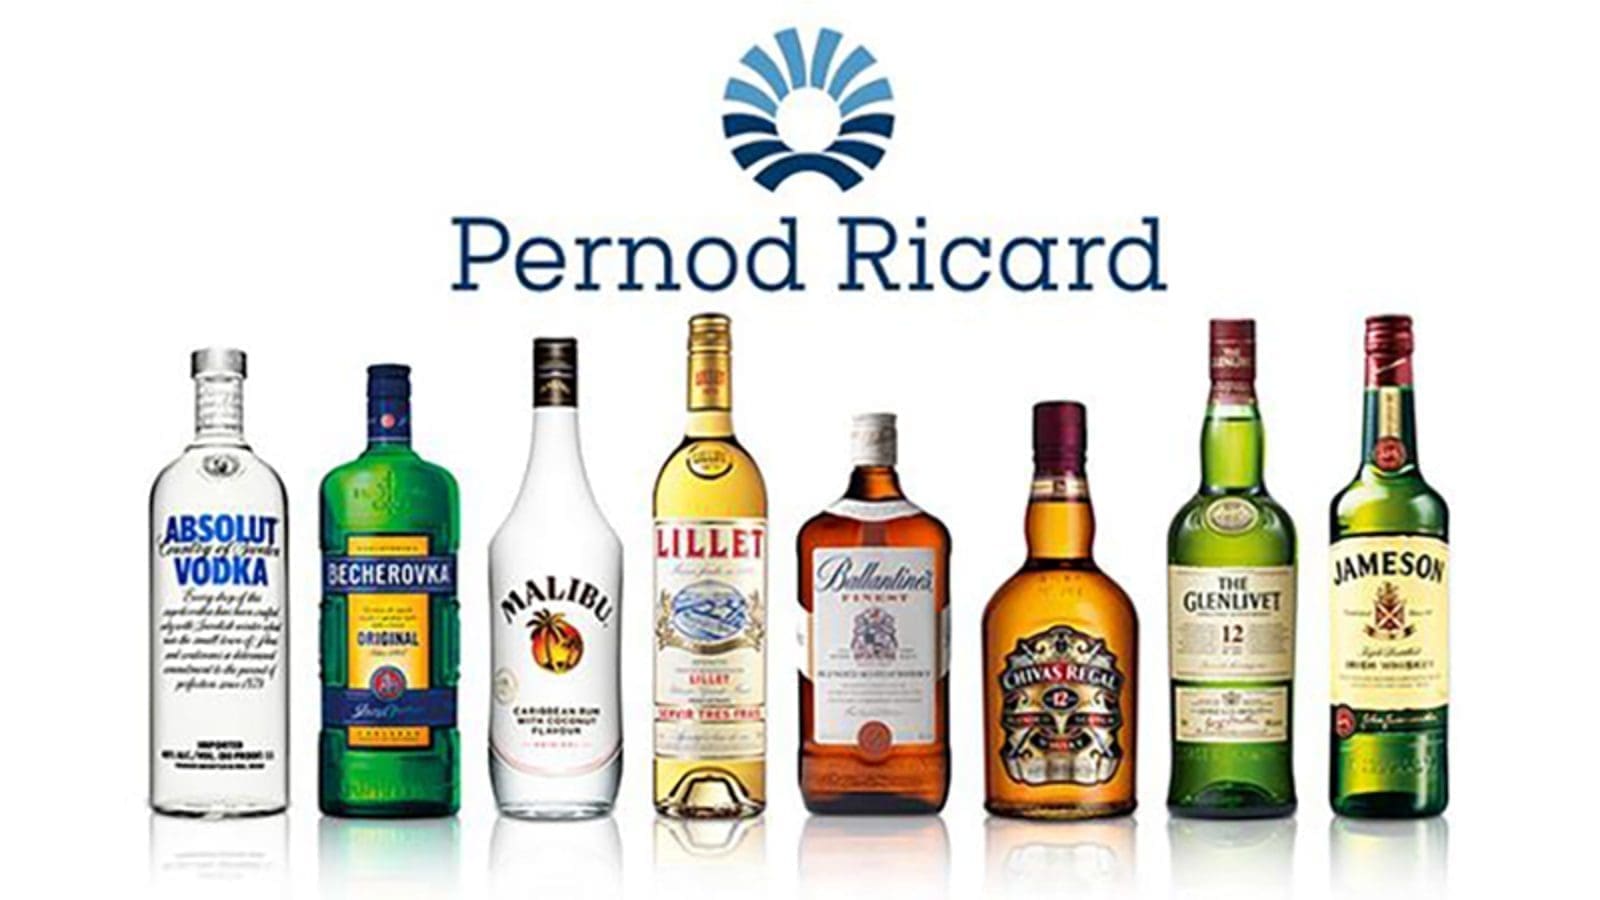 Pernod Ricard reports 10% increase in net sales for fiscal year 2022/23